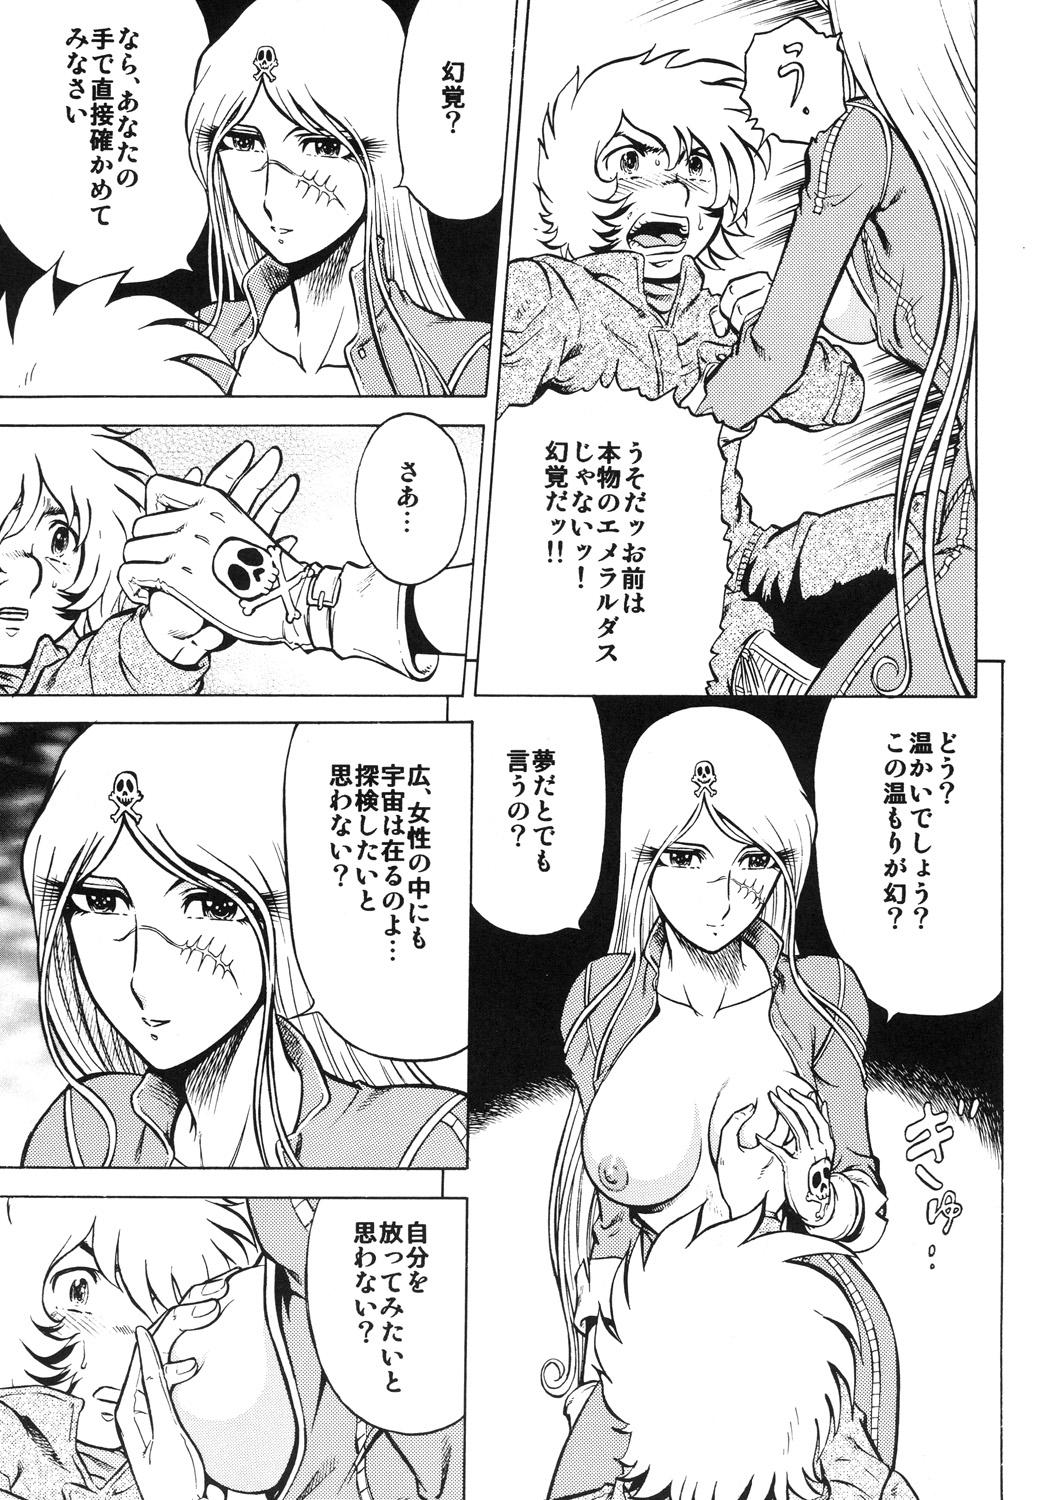 Pussy Fucking NightHead+2 - Space pirate captain harlock Viet - Page 10